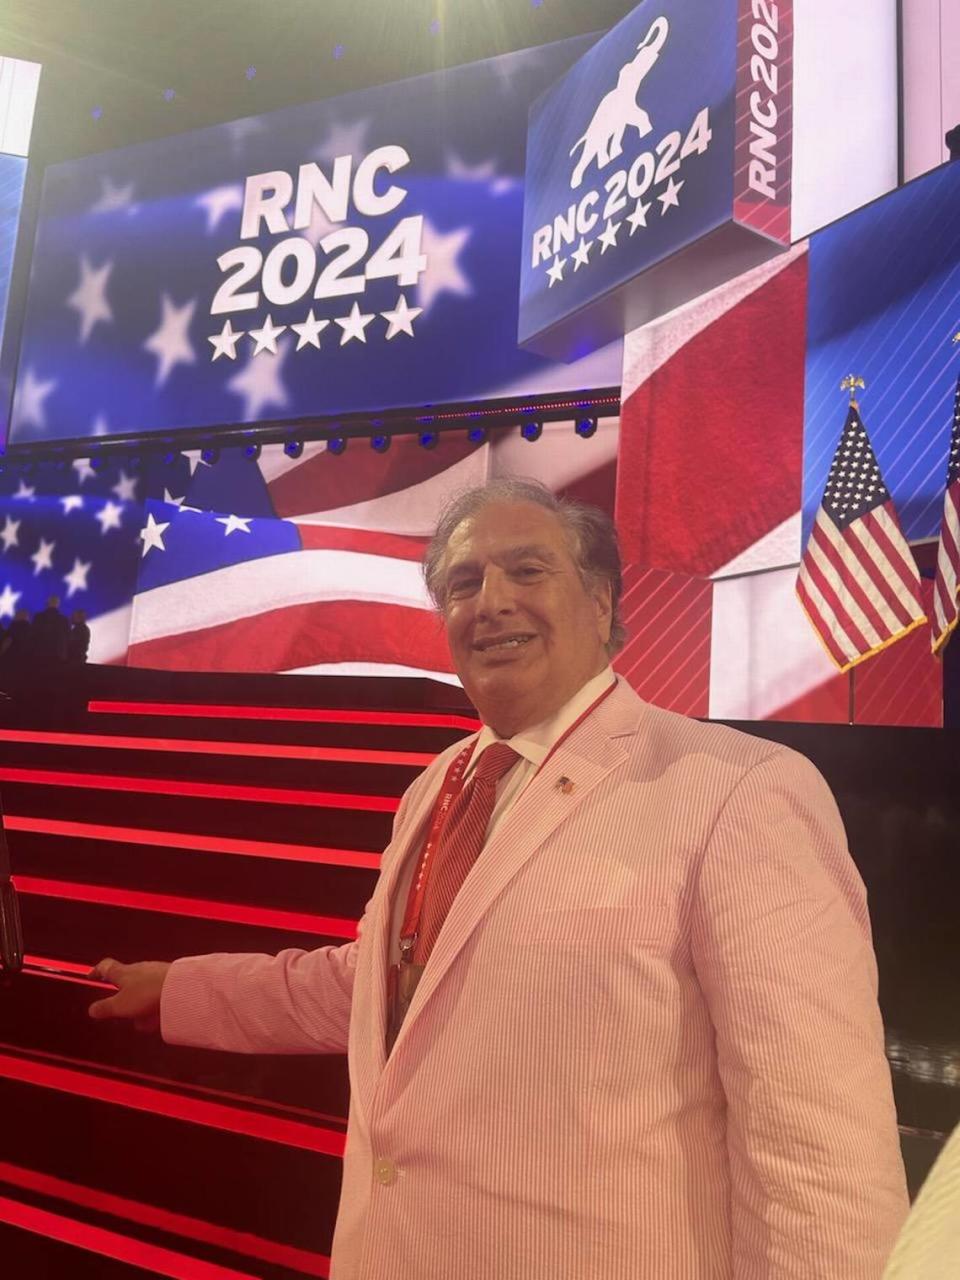 North Carolina delegate A.J. Daoud poses at the Republican National Convention in Milwaukee, Wisconsin on July 15, 2024.